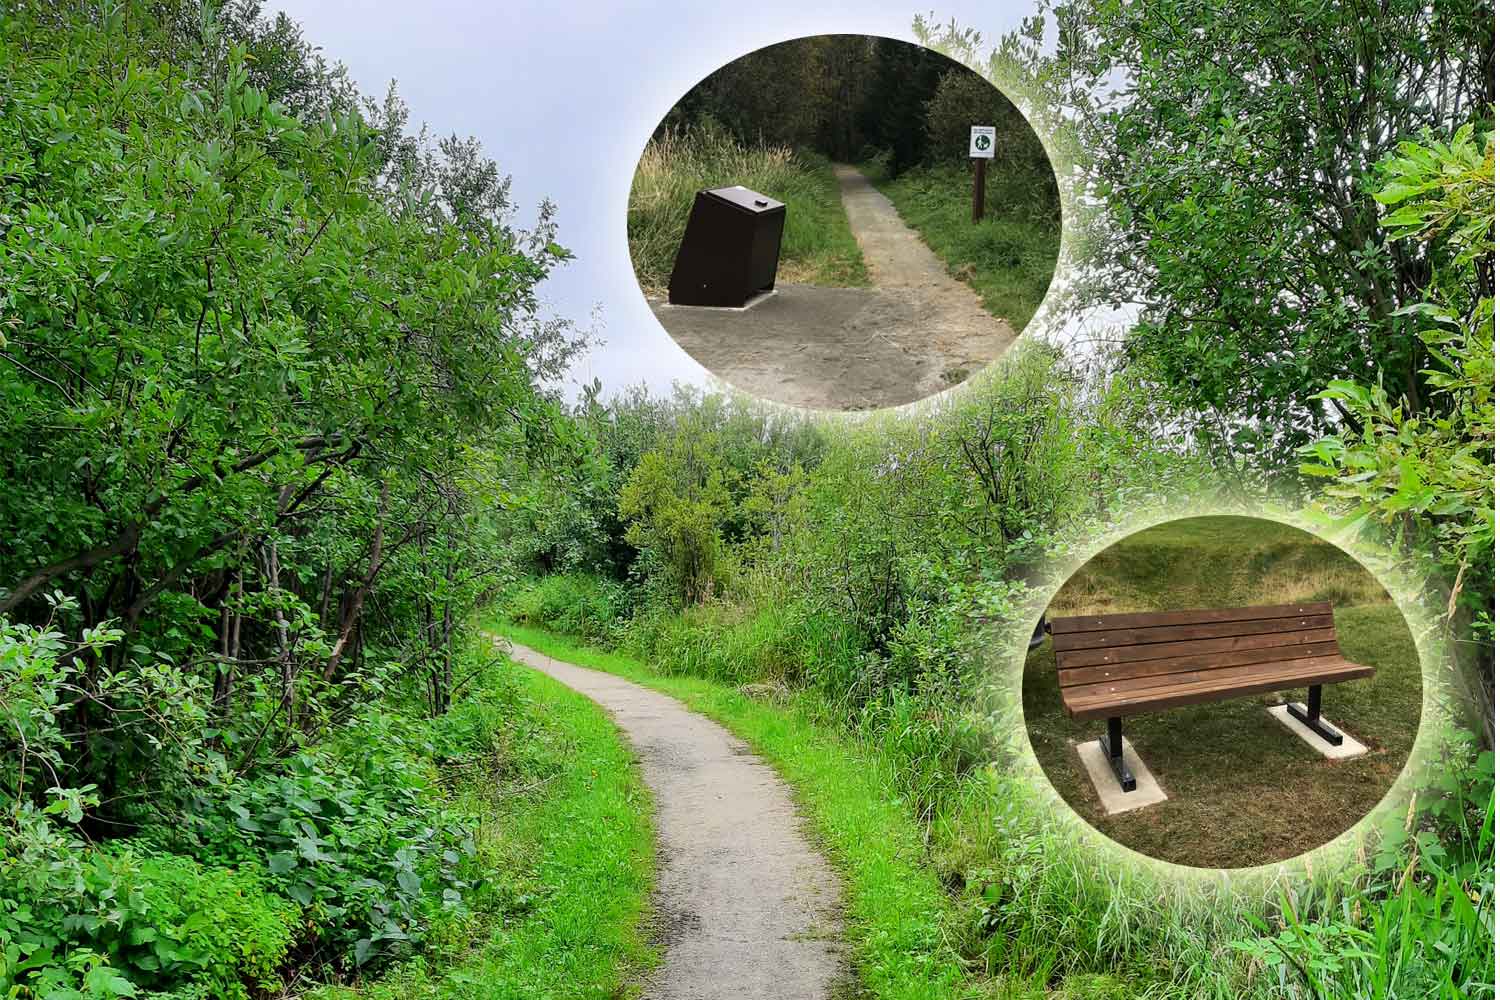 widened trail areas, new benches and bear proof garbage bins